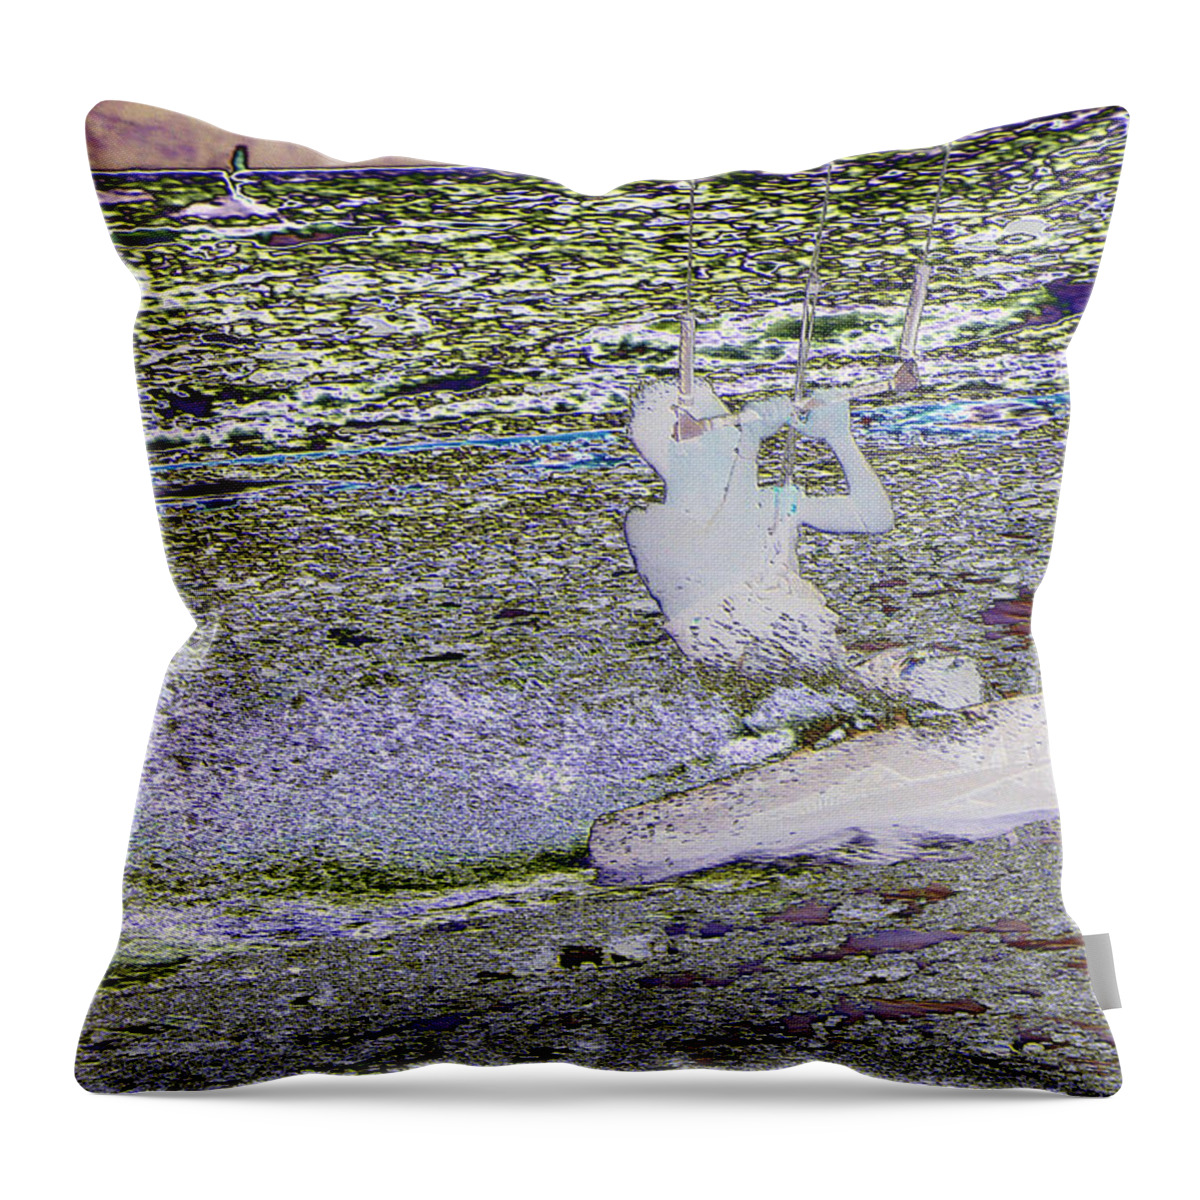 Wind Surfing Throw Pillow featuring the photograph Riding With The Wind by Jeff Swan